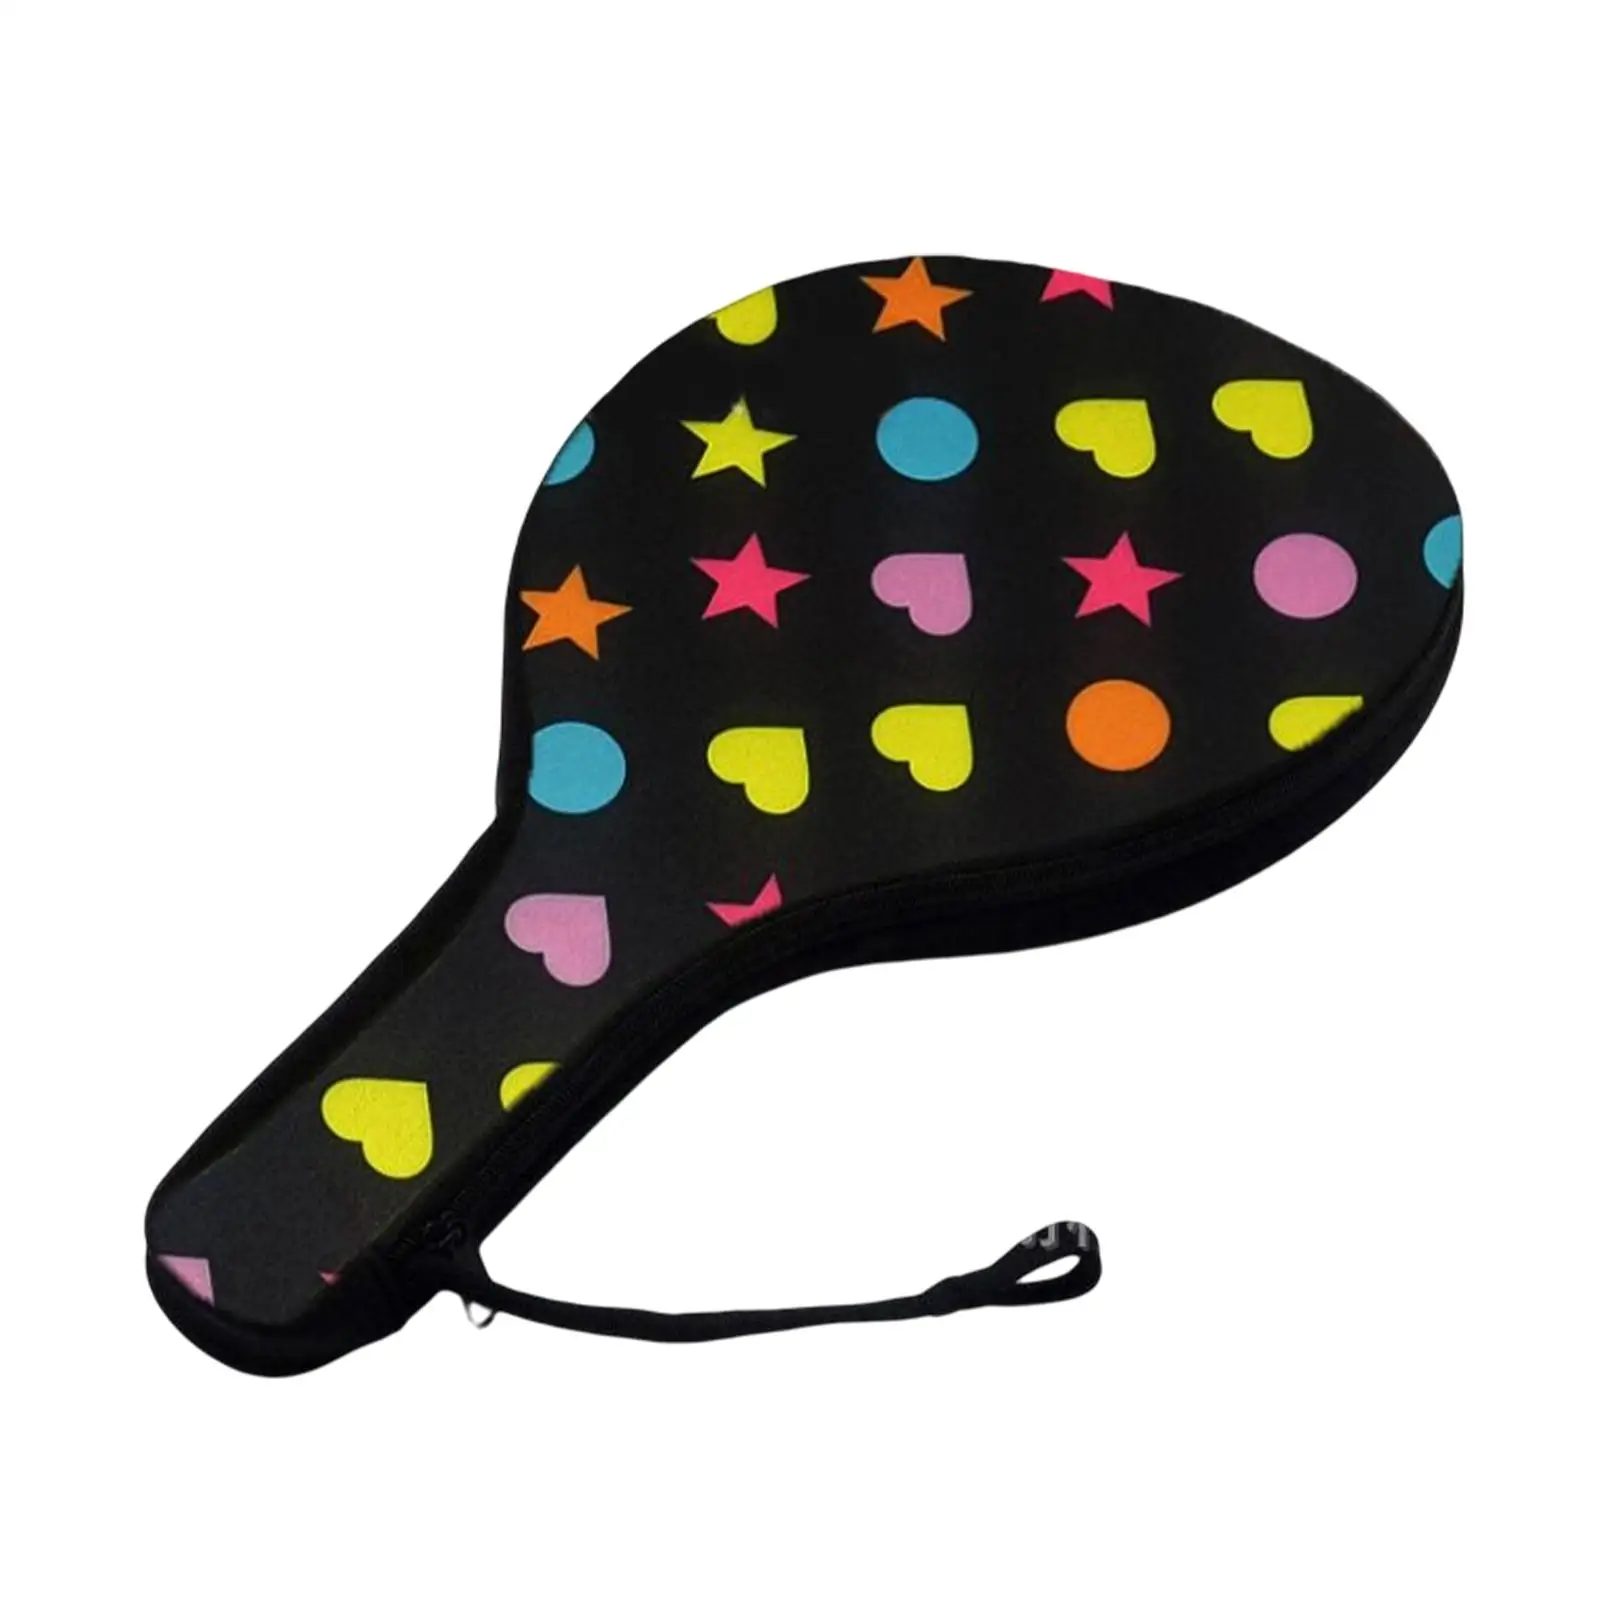 Premium Neoprene Pickleball Paddle Bag Racket Case Cover Zipper Pouch Holder Carrier Protective Paddle Sleeve Accessories